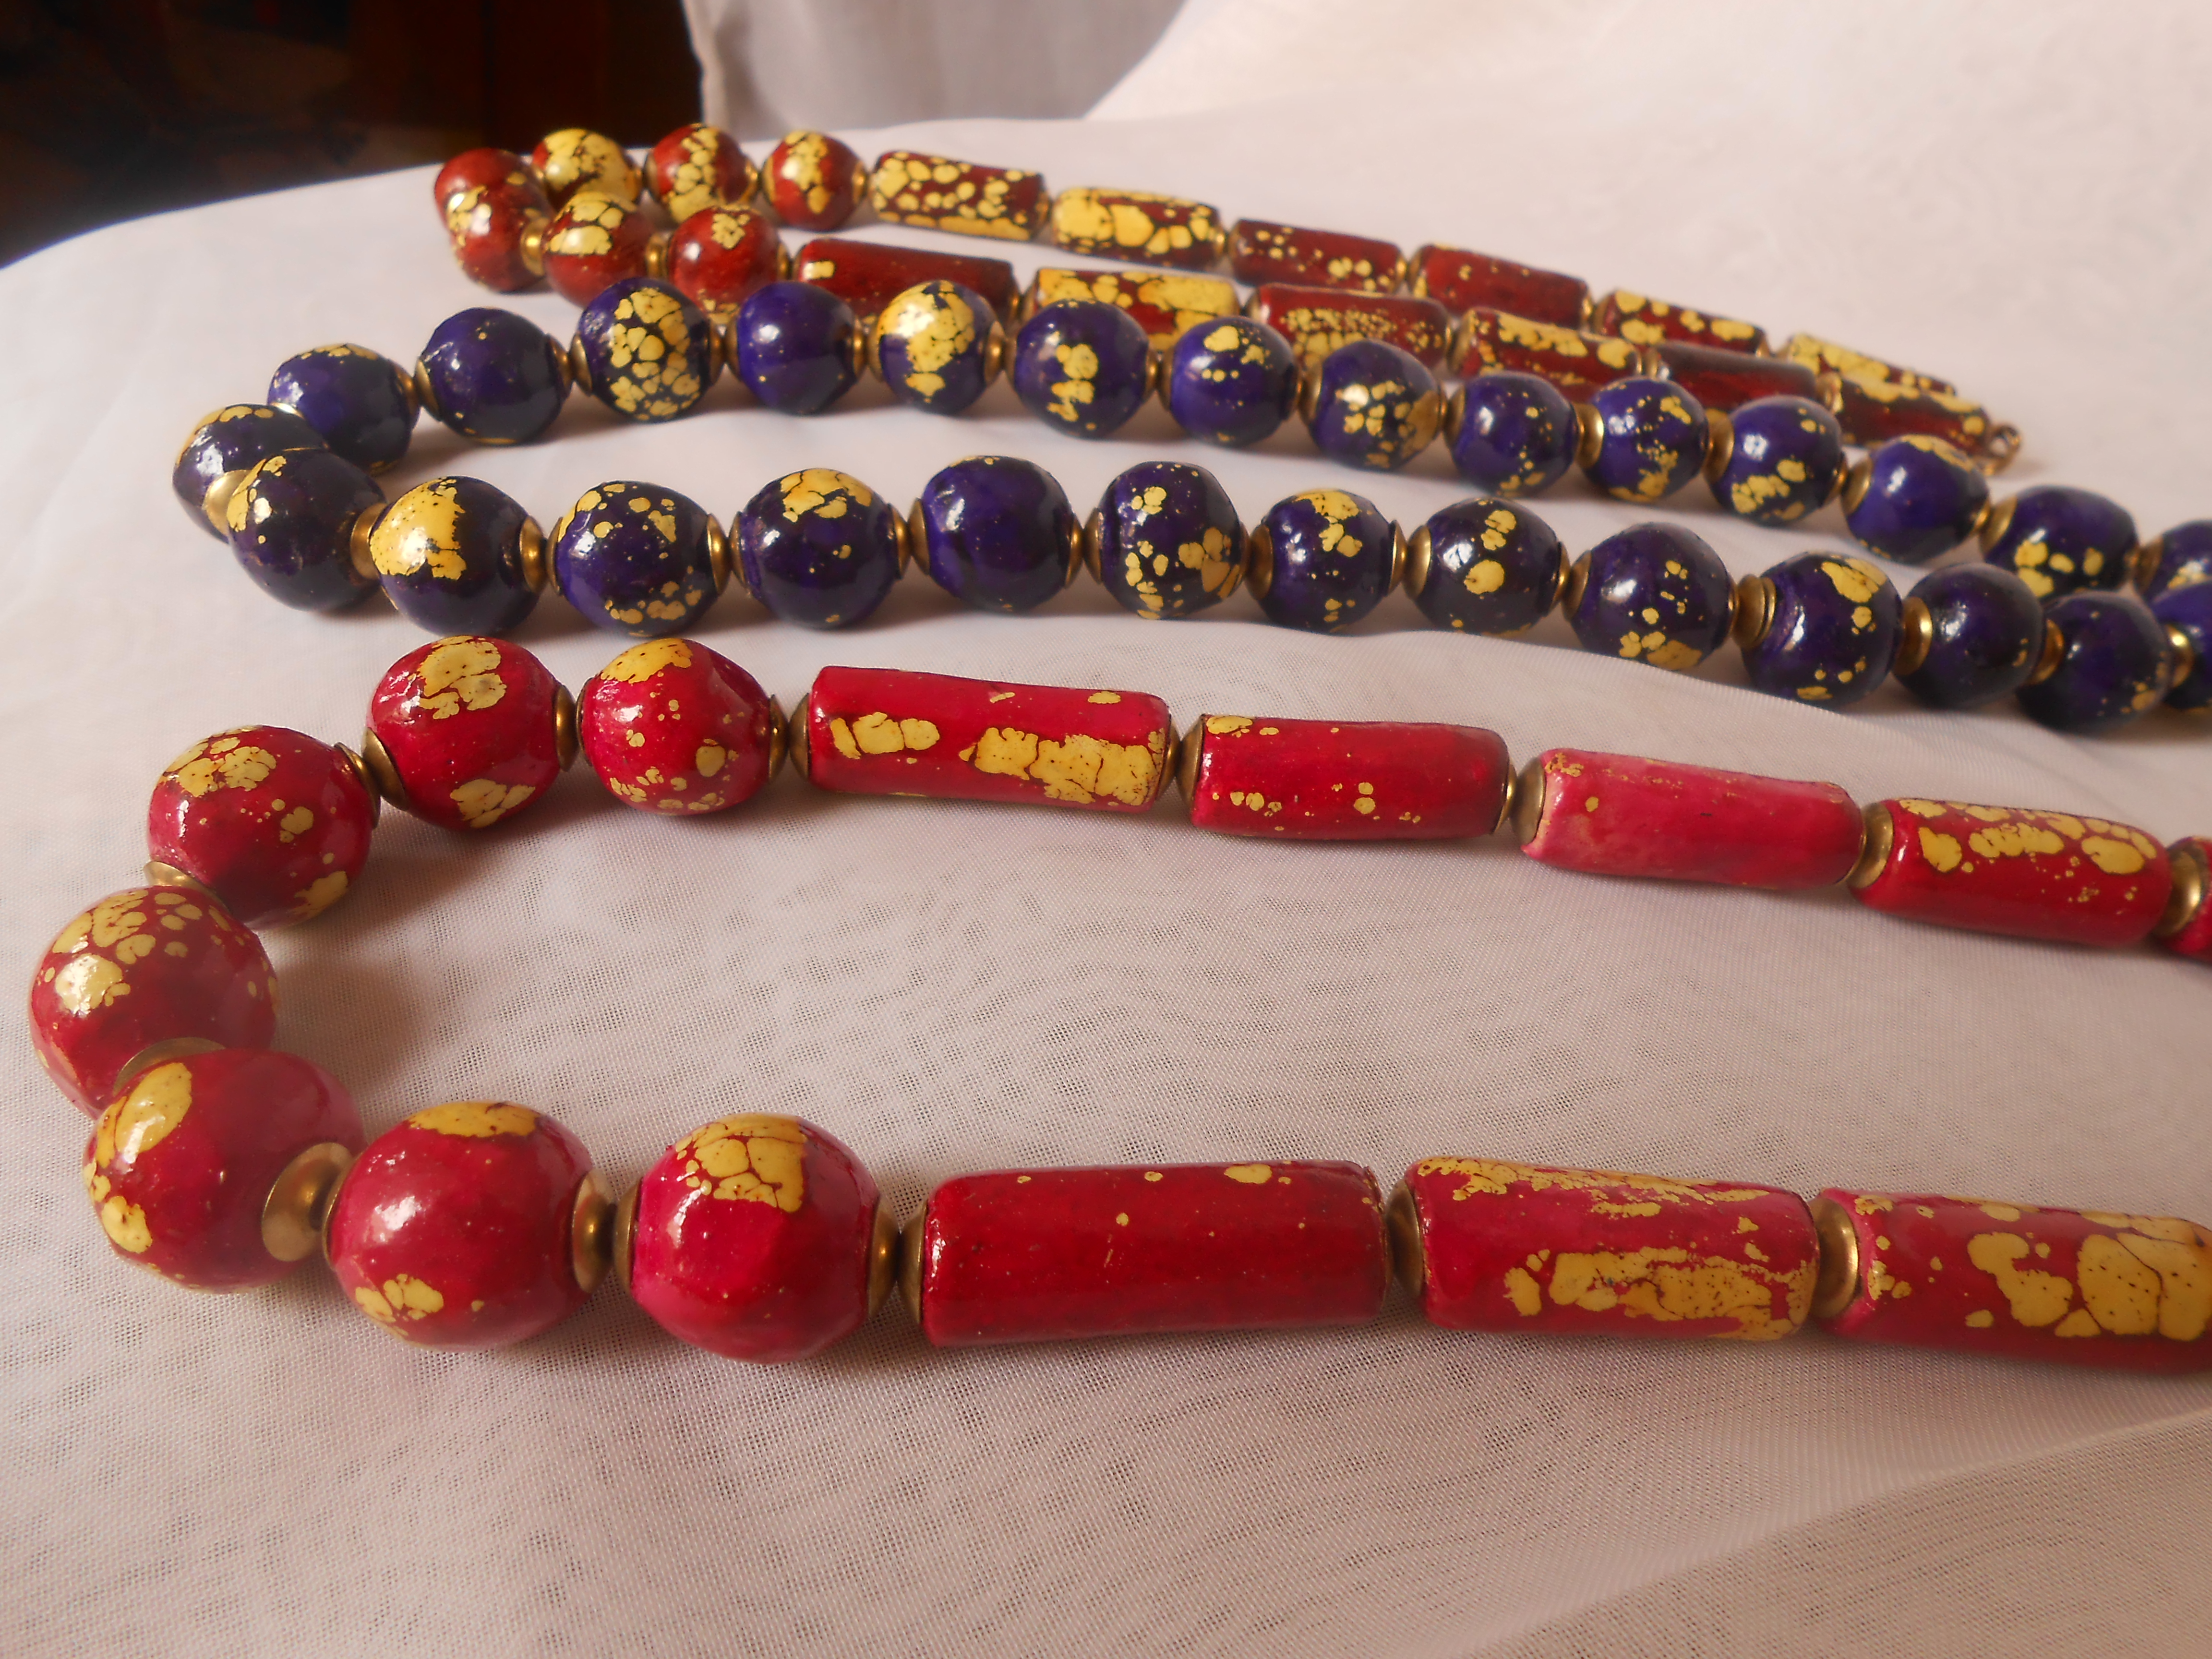 Necklaces made of big hand painted clay beads